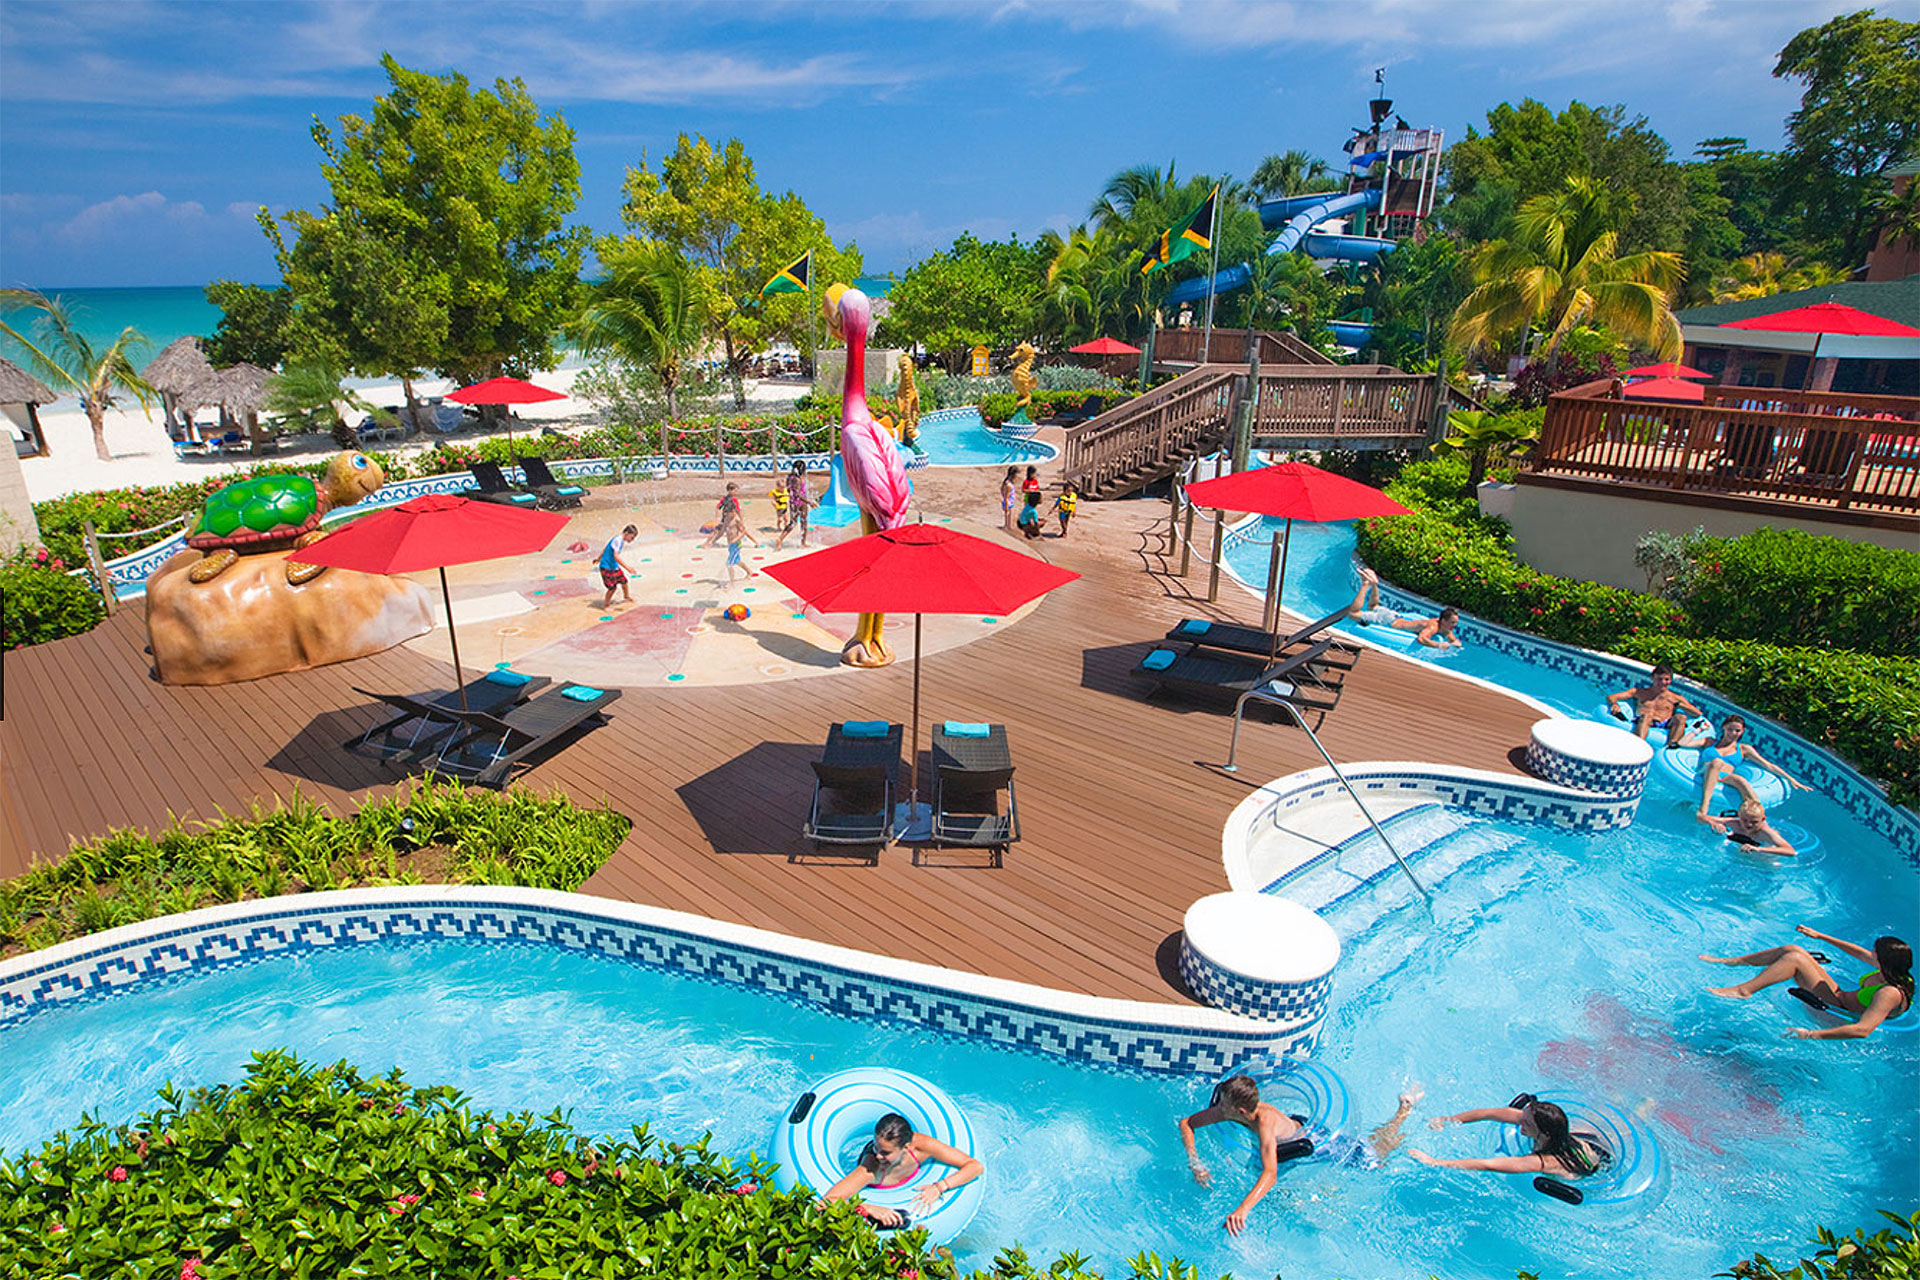 Water Park at Beaches Negril; Courtesy of Beaches Negril